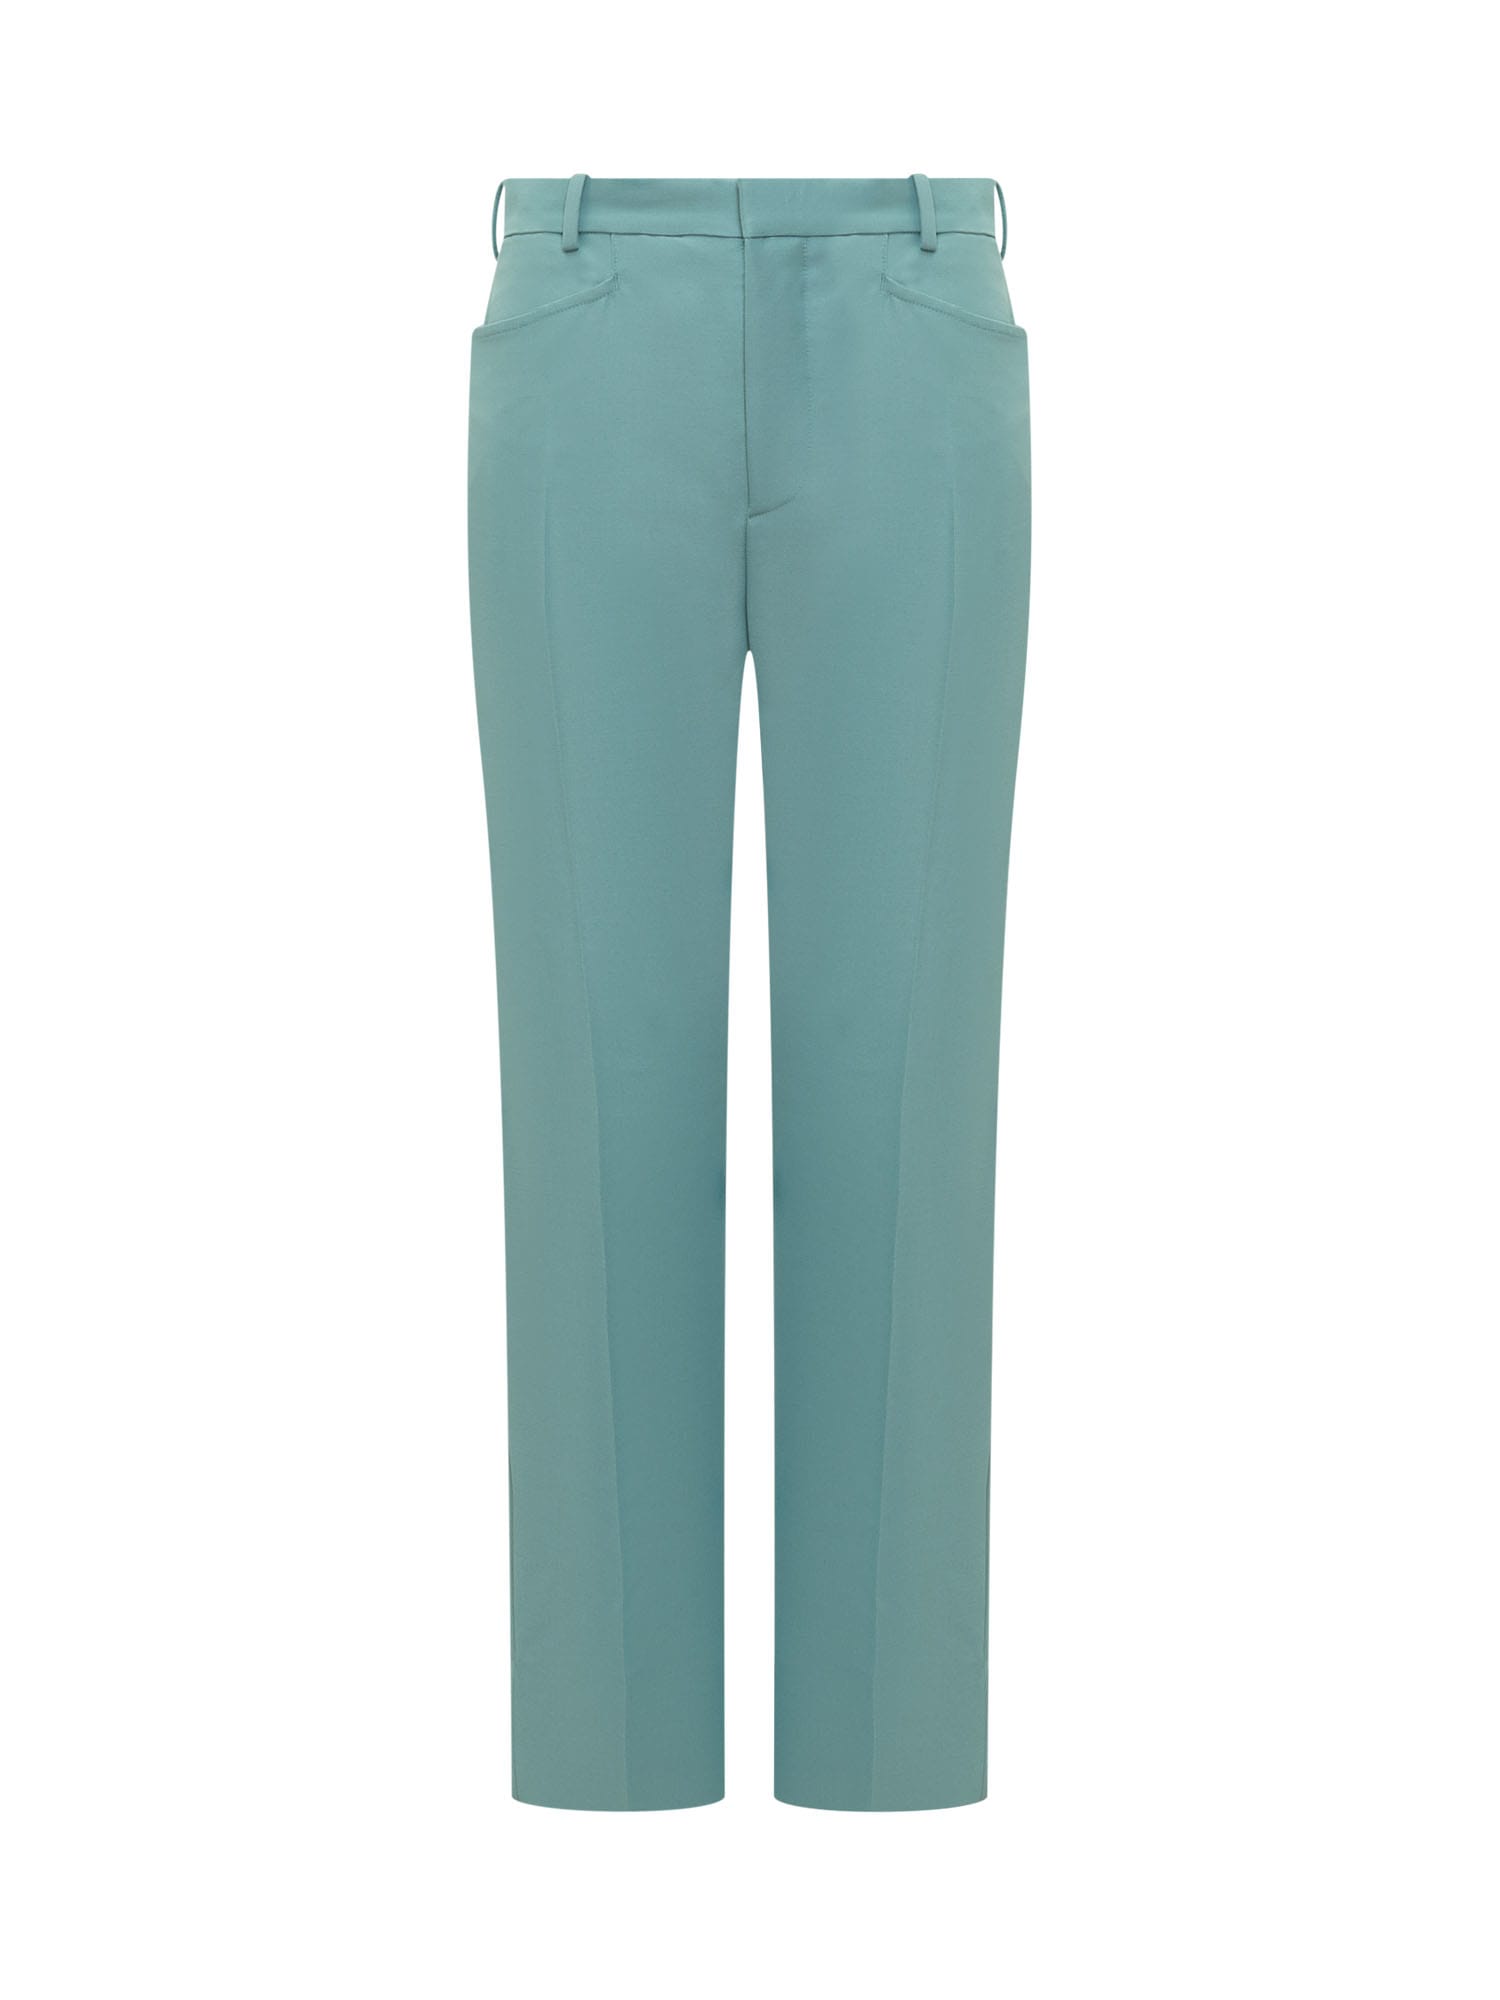 Tom Ford Wool And Viscose Blend Pants In Light Turquoise